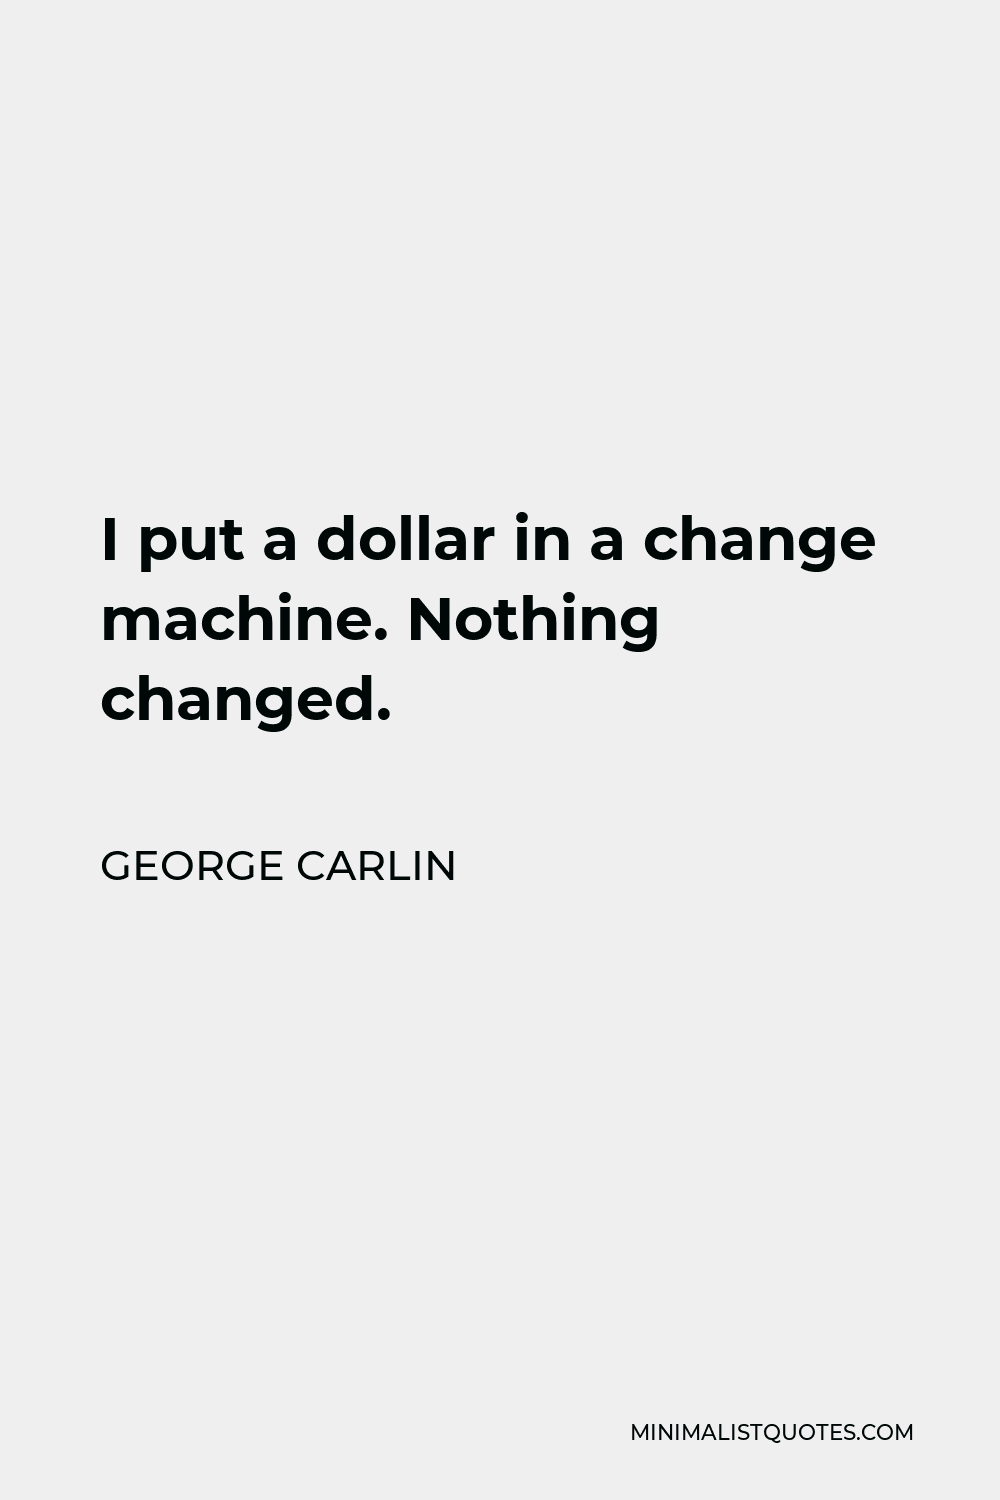 George Carlin Quote - I put a dollar in a change machine. Nothing changed.